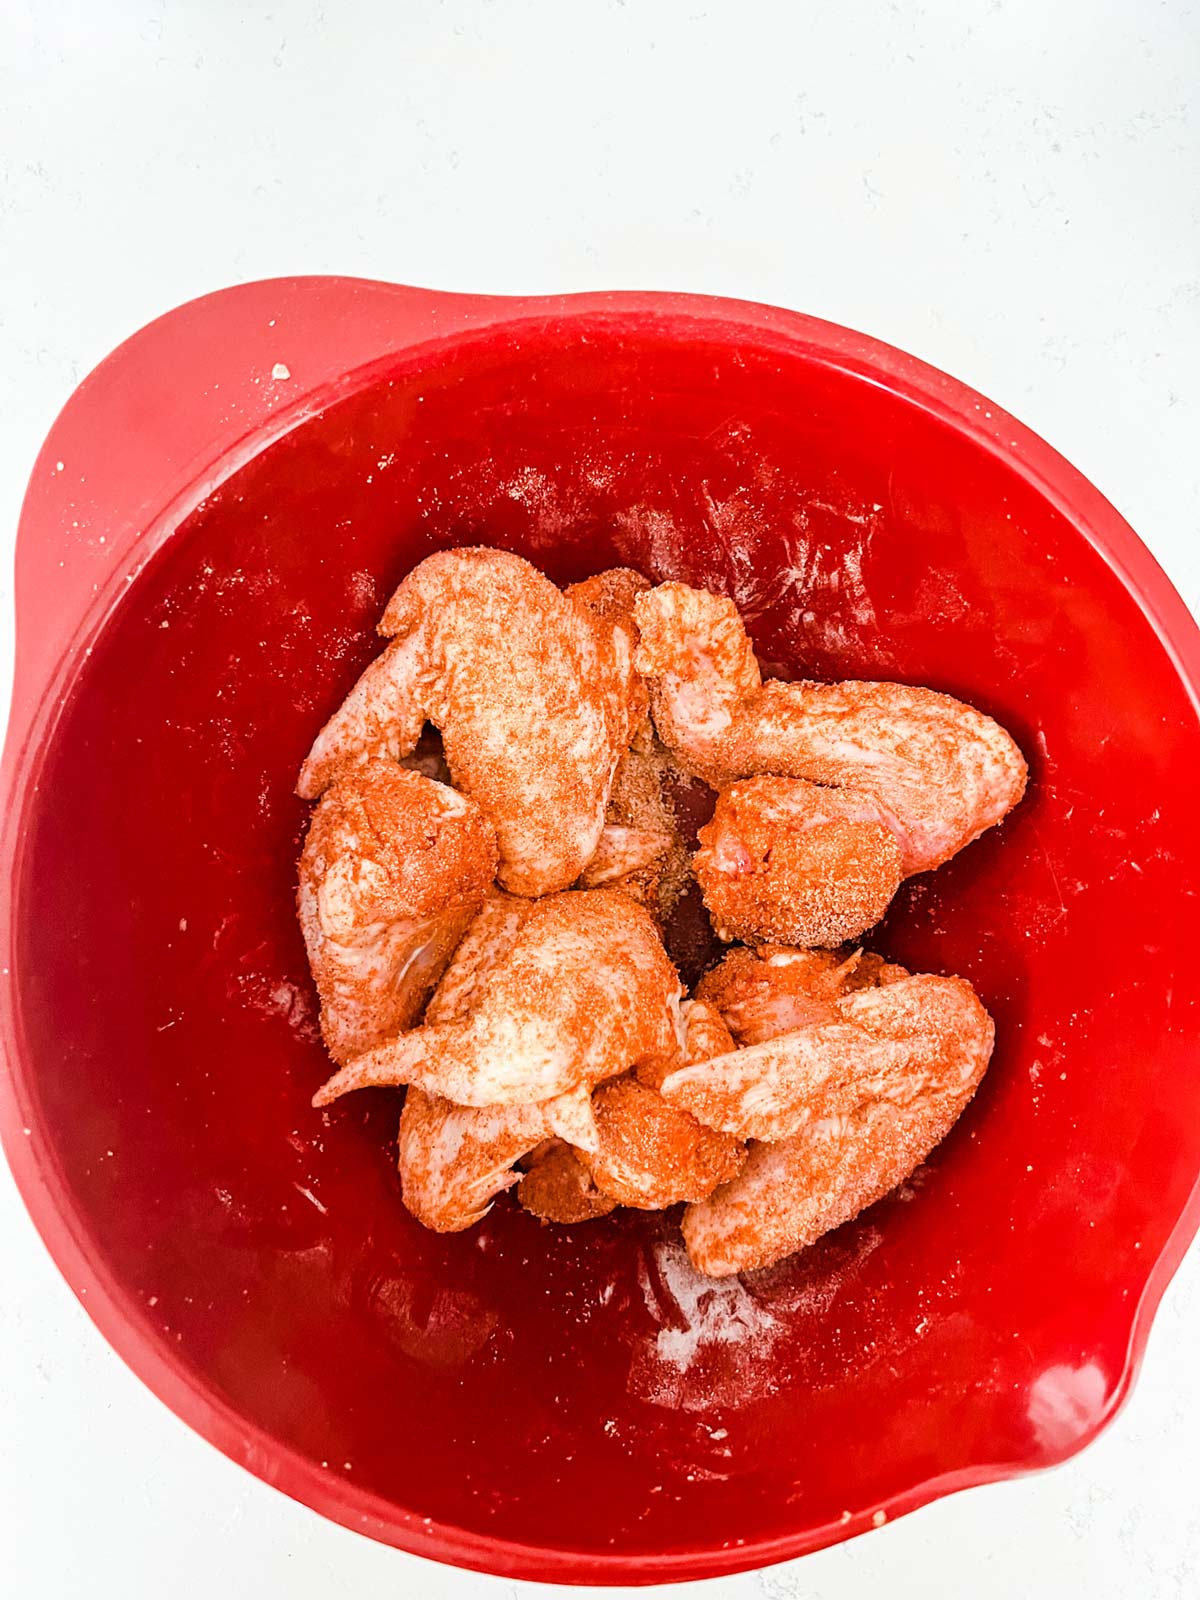 Chicken wings that have been tossed with seasonings in a red bowl.